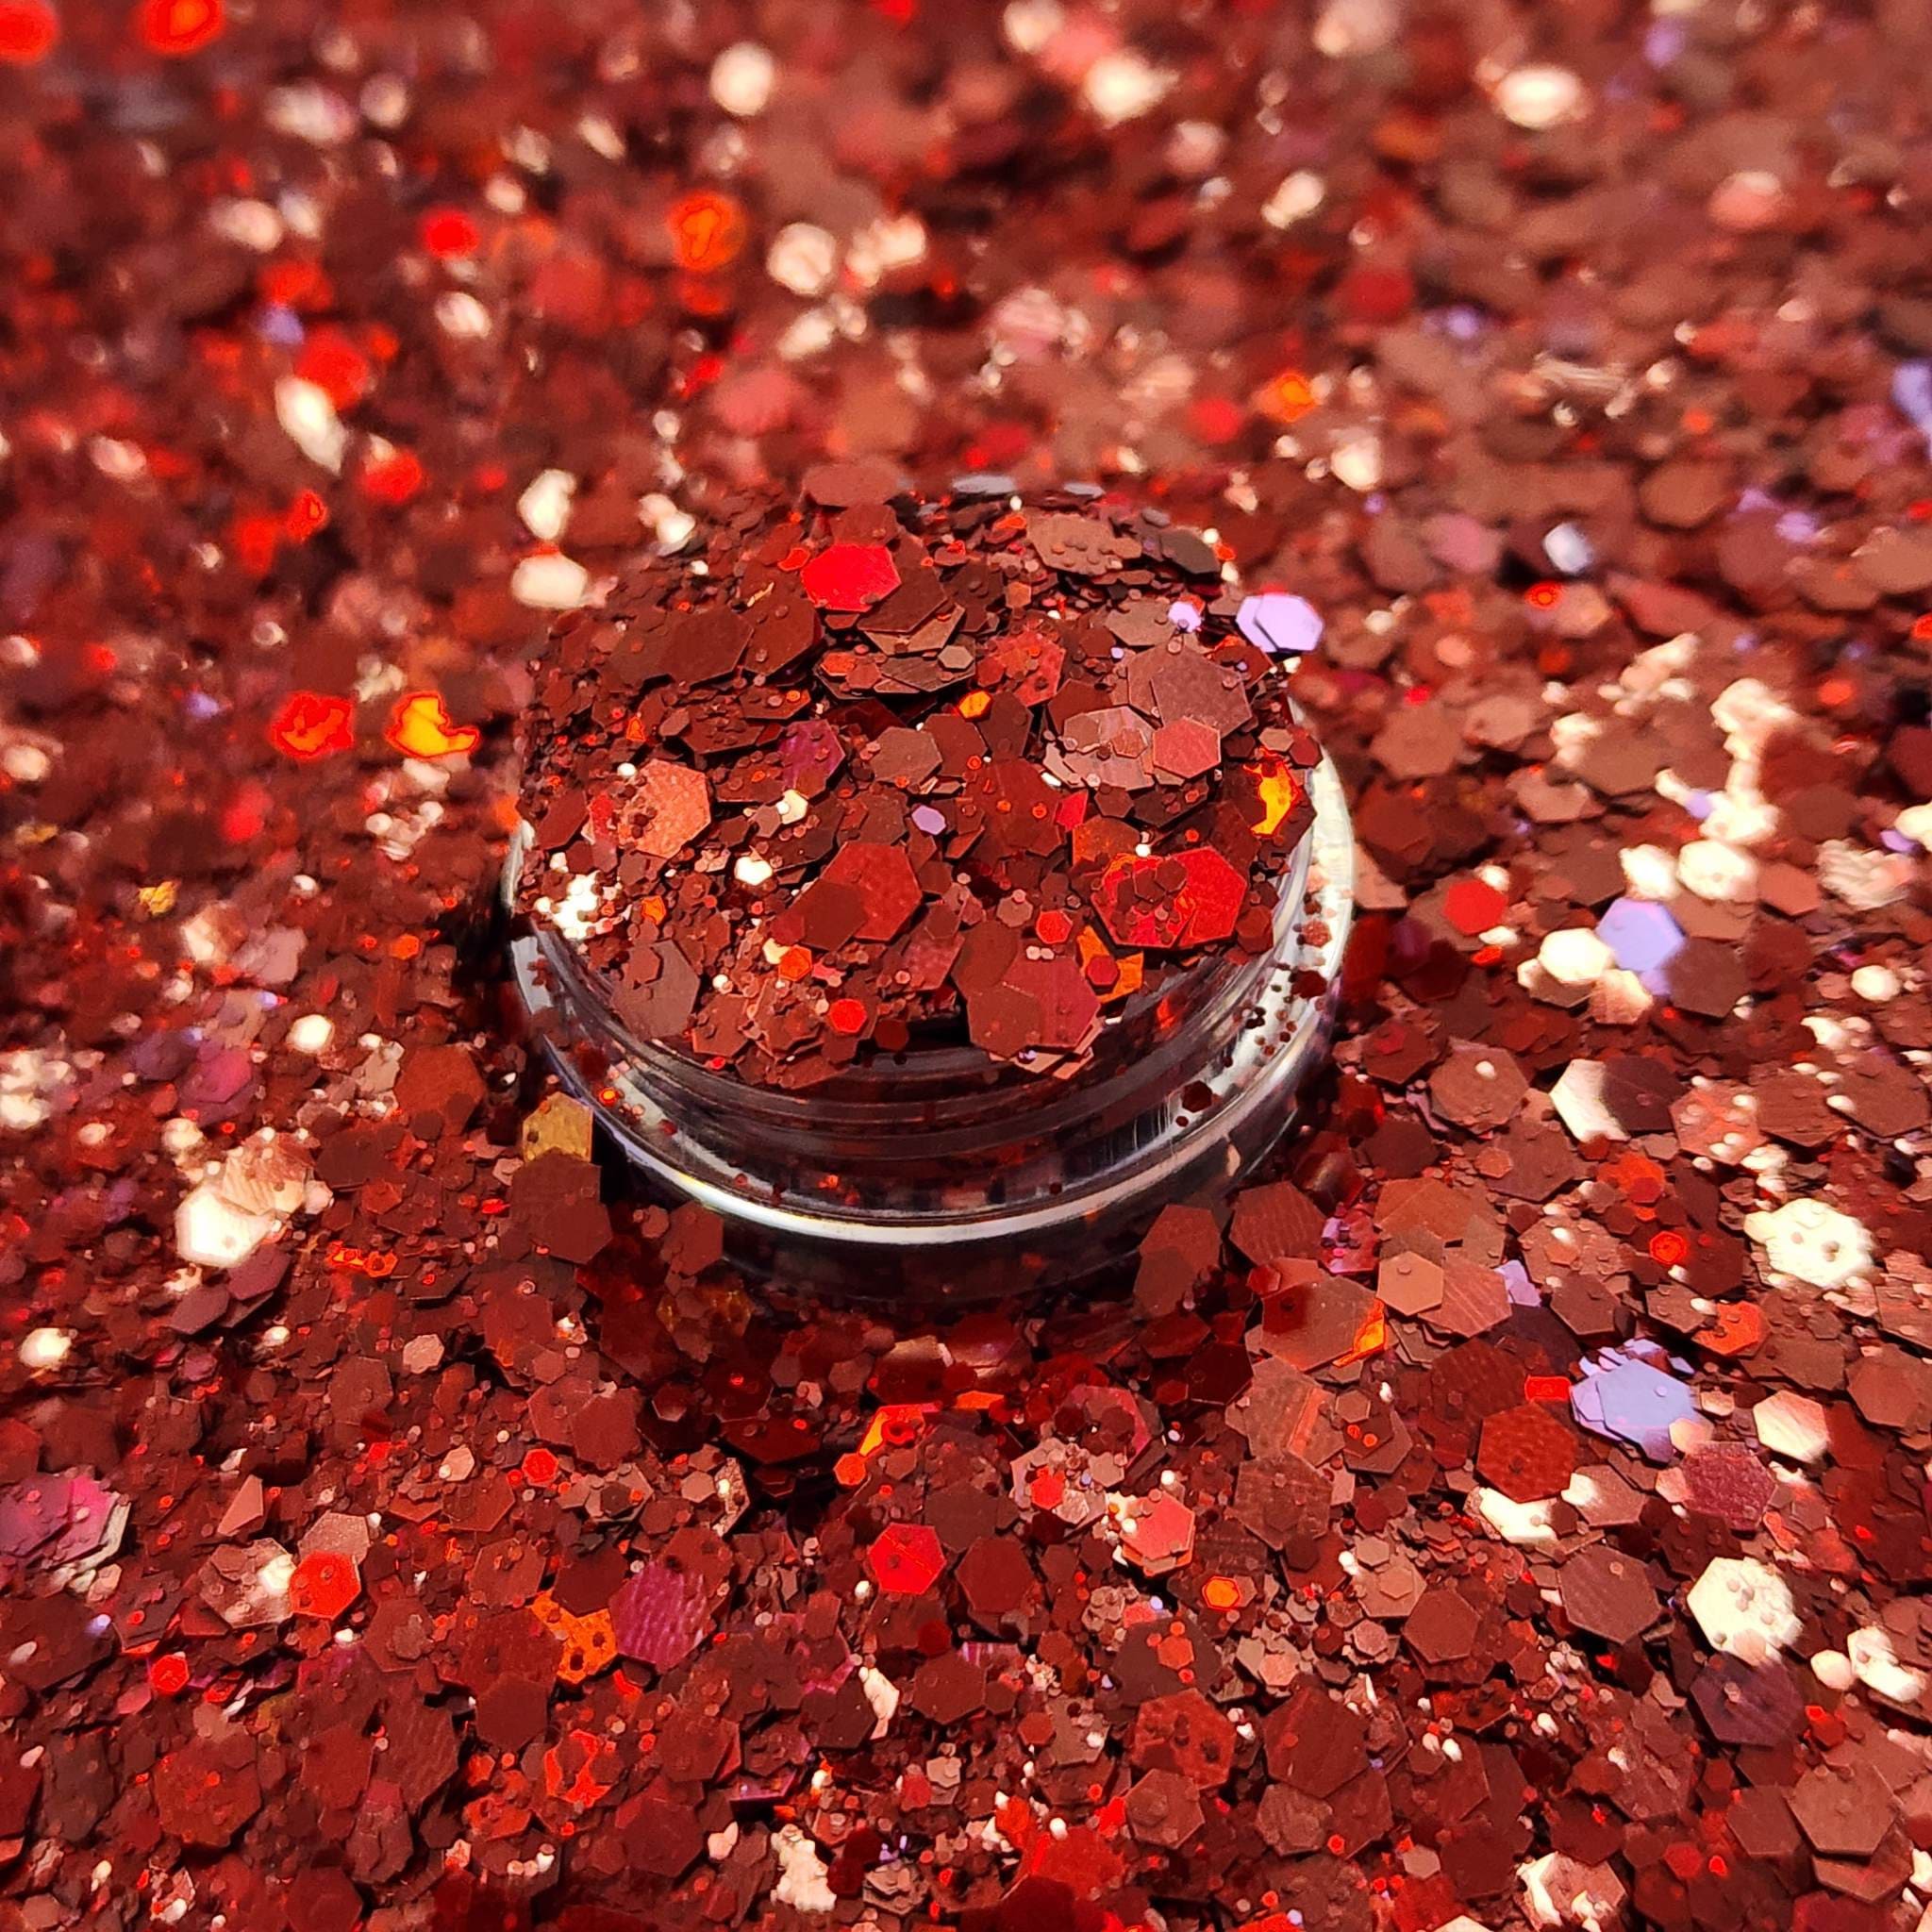 Ruby Red Mix- Chunky Glitter Mix Glitter for lip gloss, face, body, na –  Glittery - Your #1 source for all kinds of glitter products!